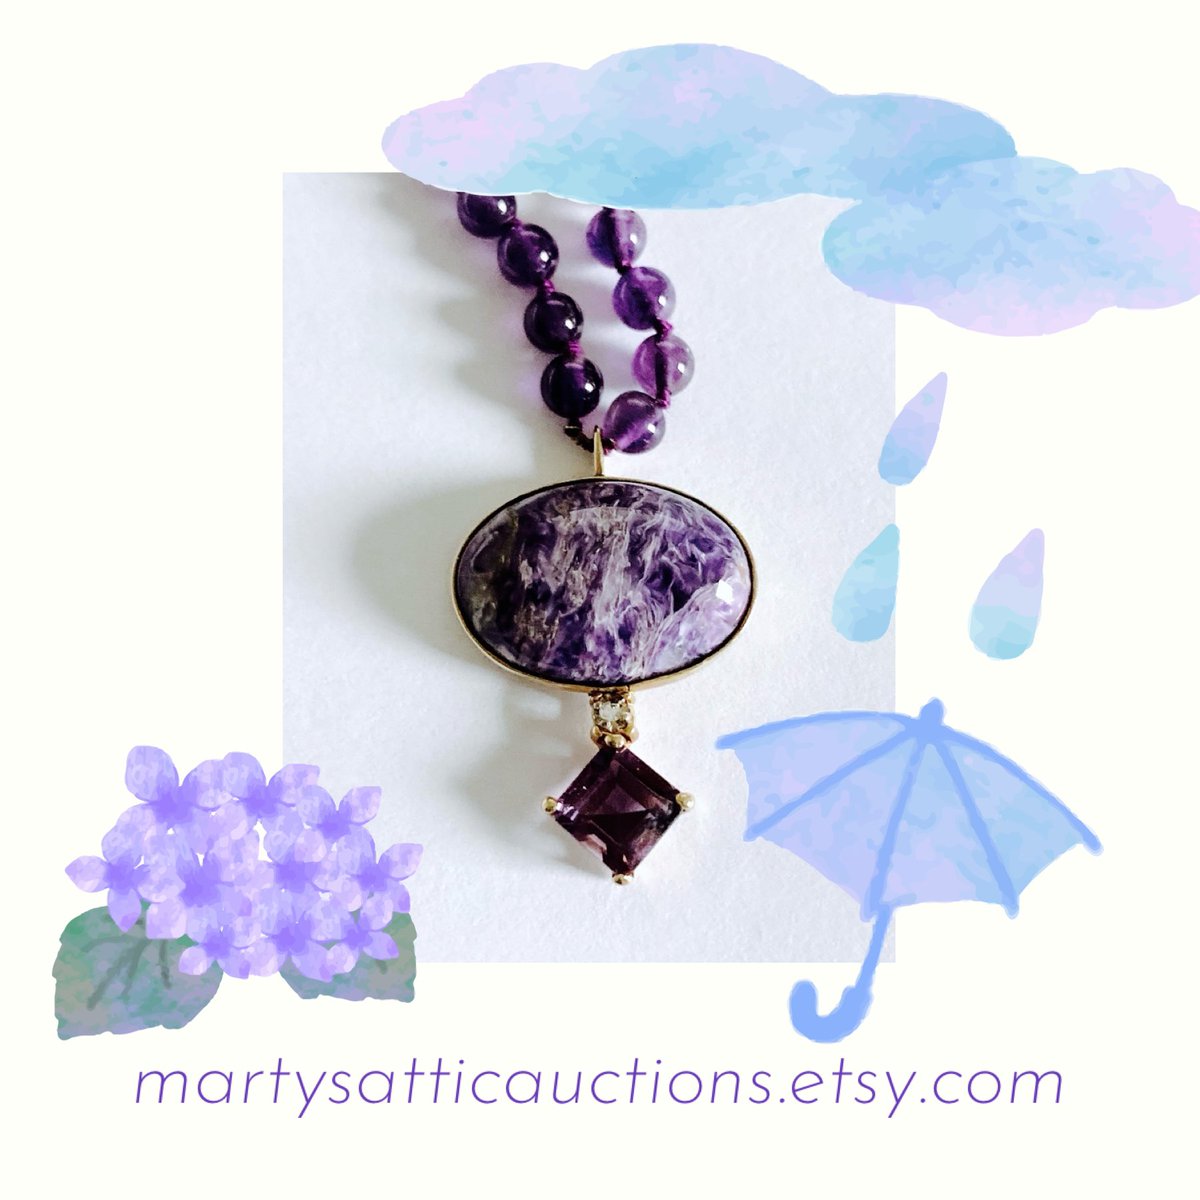 Custom Artisan Amethyst Hand Knotted Beads with Bezel Set Oval Charoit, Small Round Diamond and Square Amethyst Pendant in 14kt Yellow Gold martysatticauctions.etsy.com